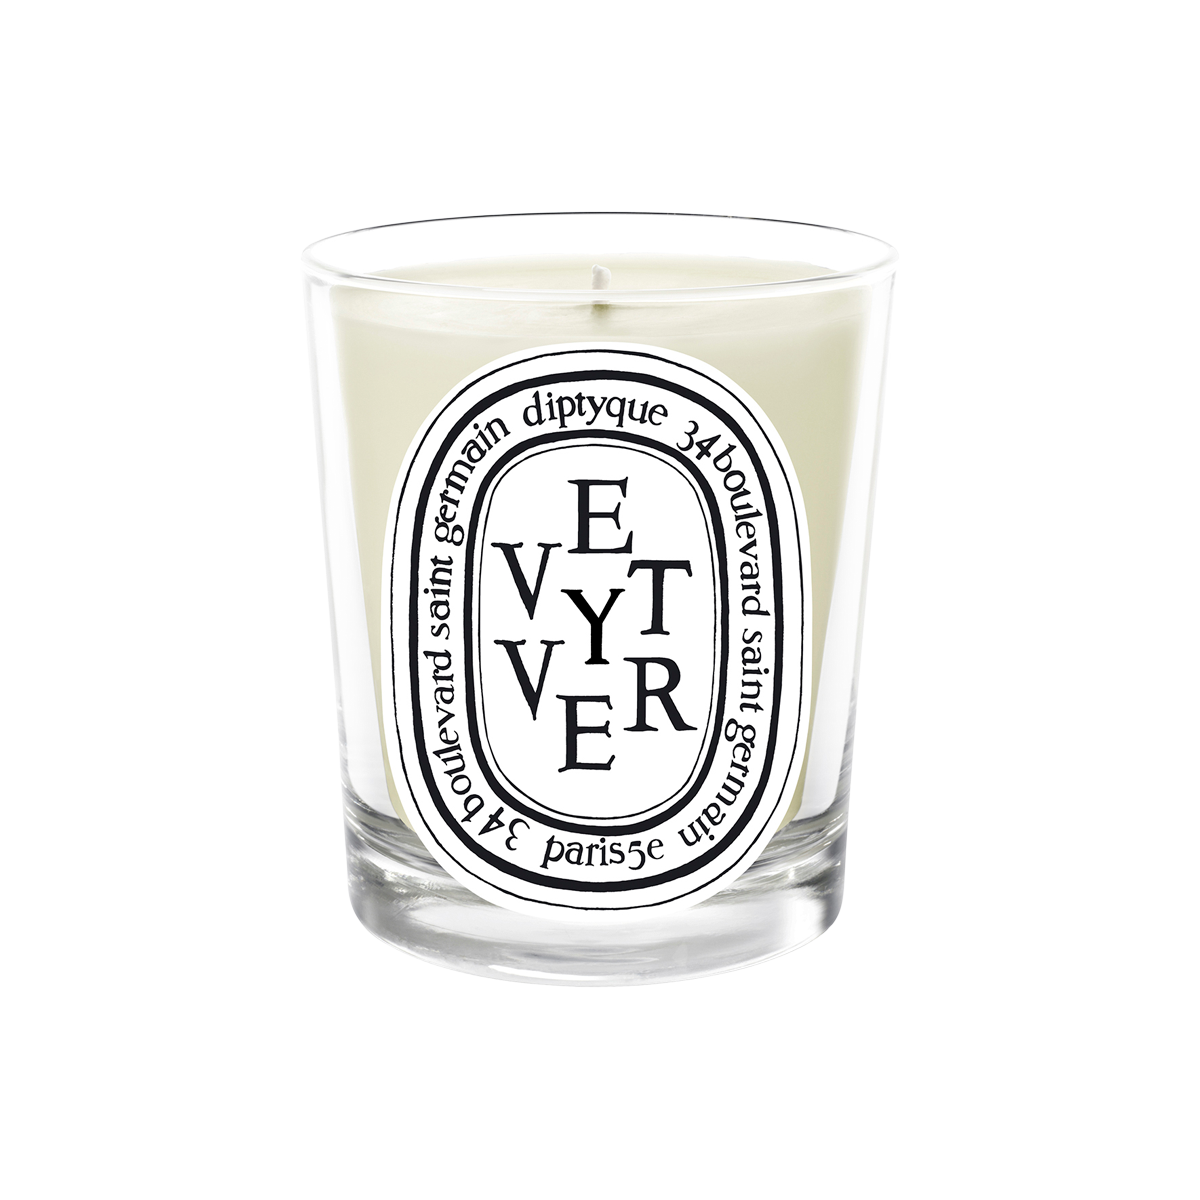 Diptyque - Vetyver Scented Candle